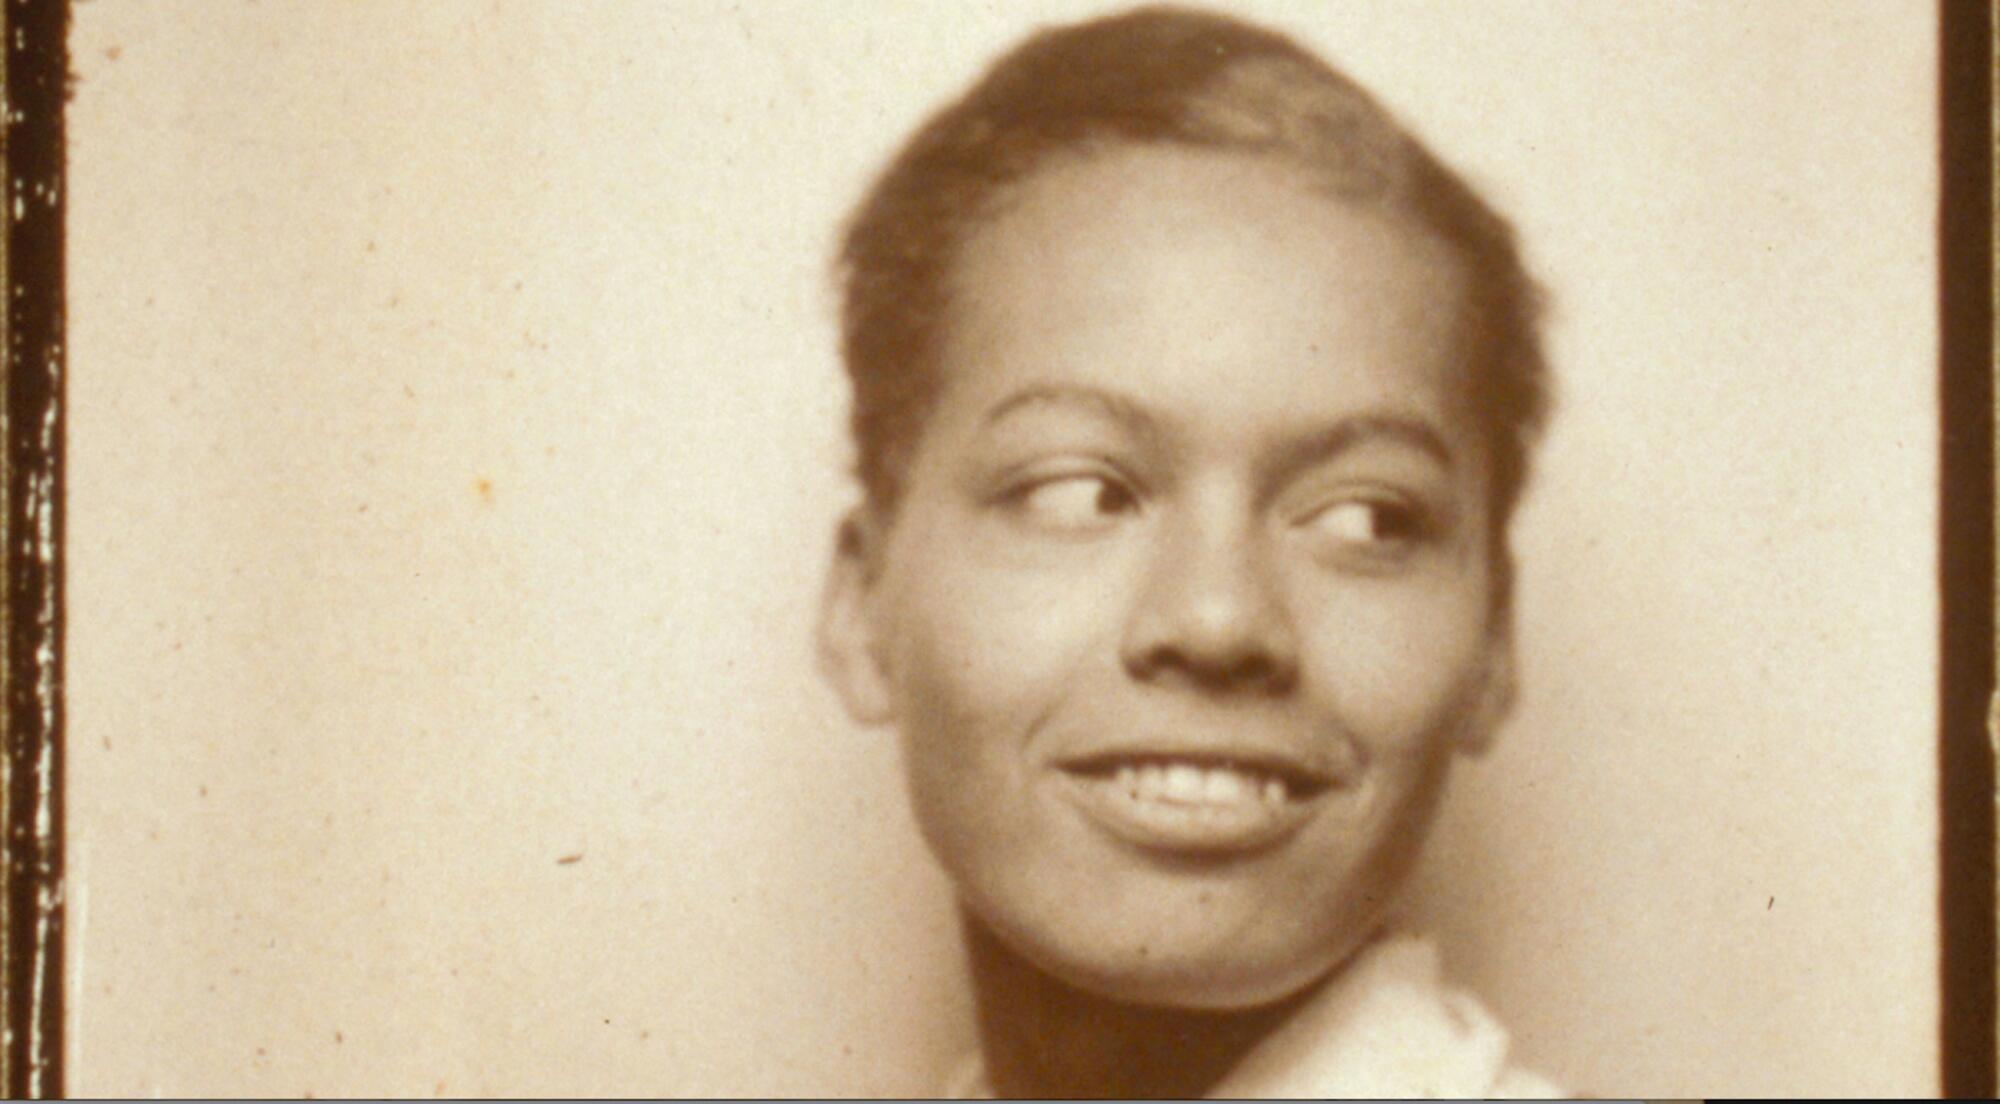 A personal photograph of a young Pauli Murray.